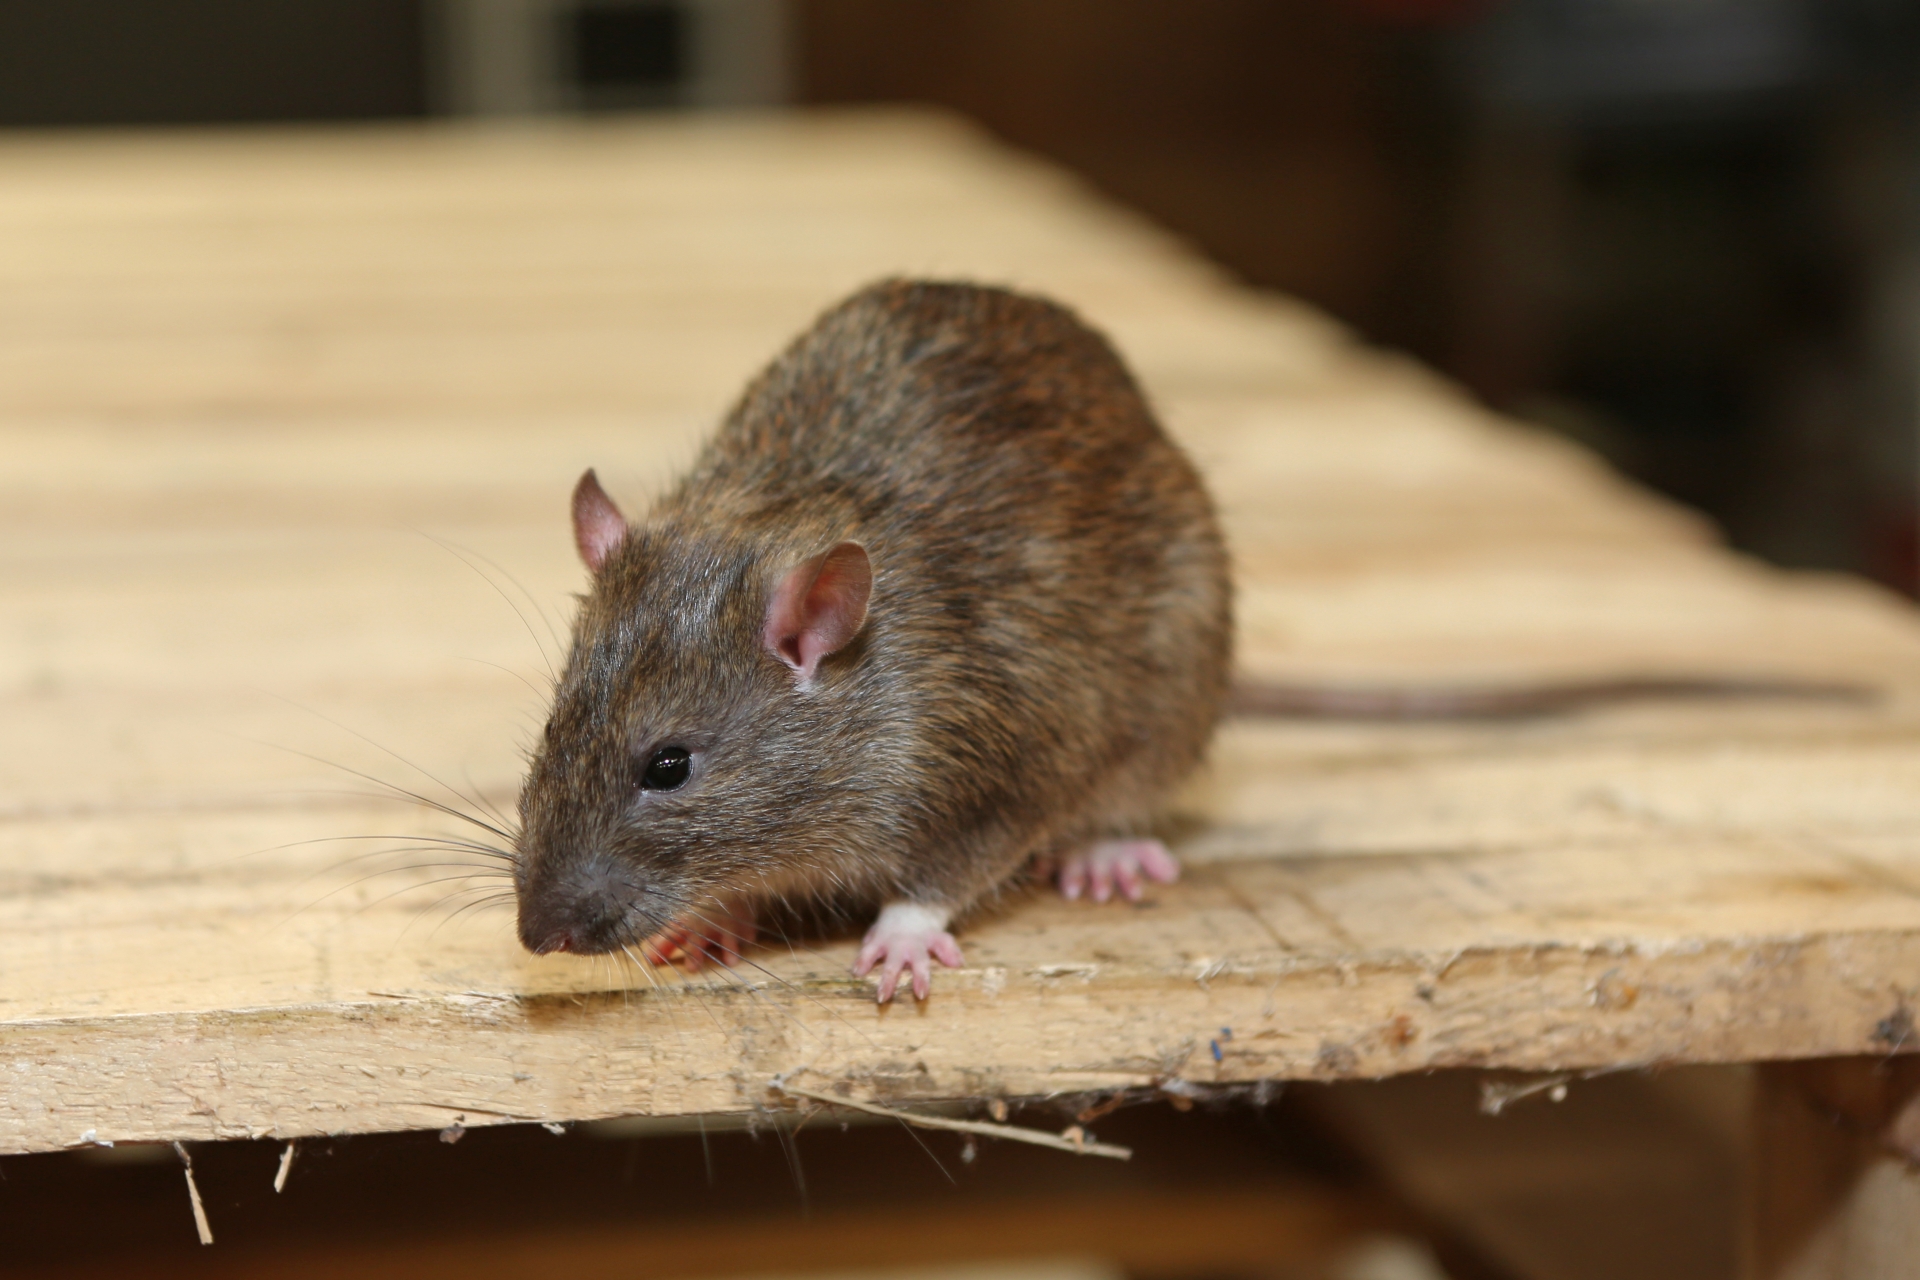 Rat extermination, Pest Control in Barking, Creekmouth, IG11. Call Now 020 8166 9746